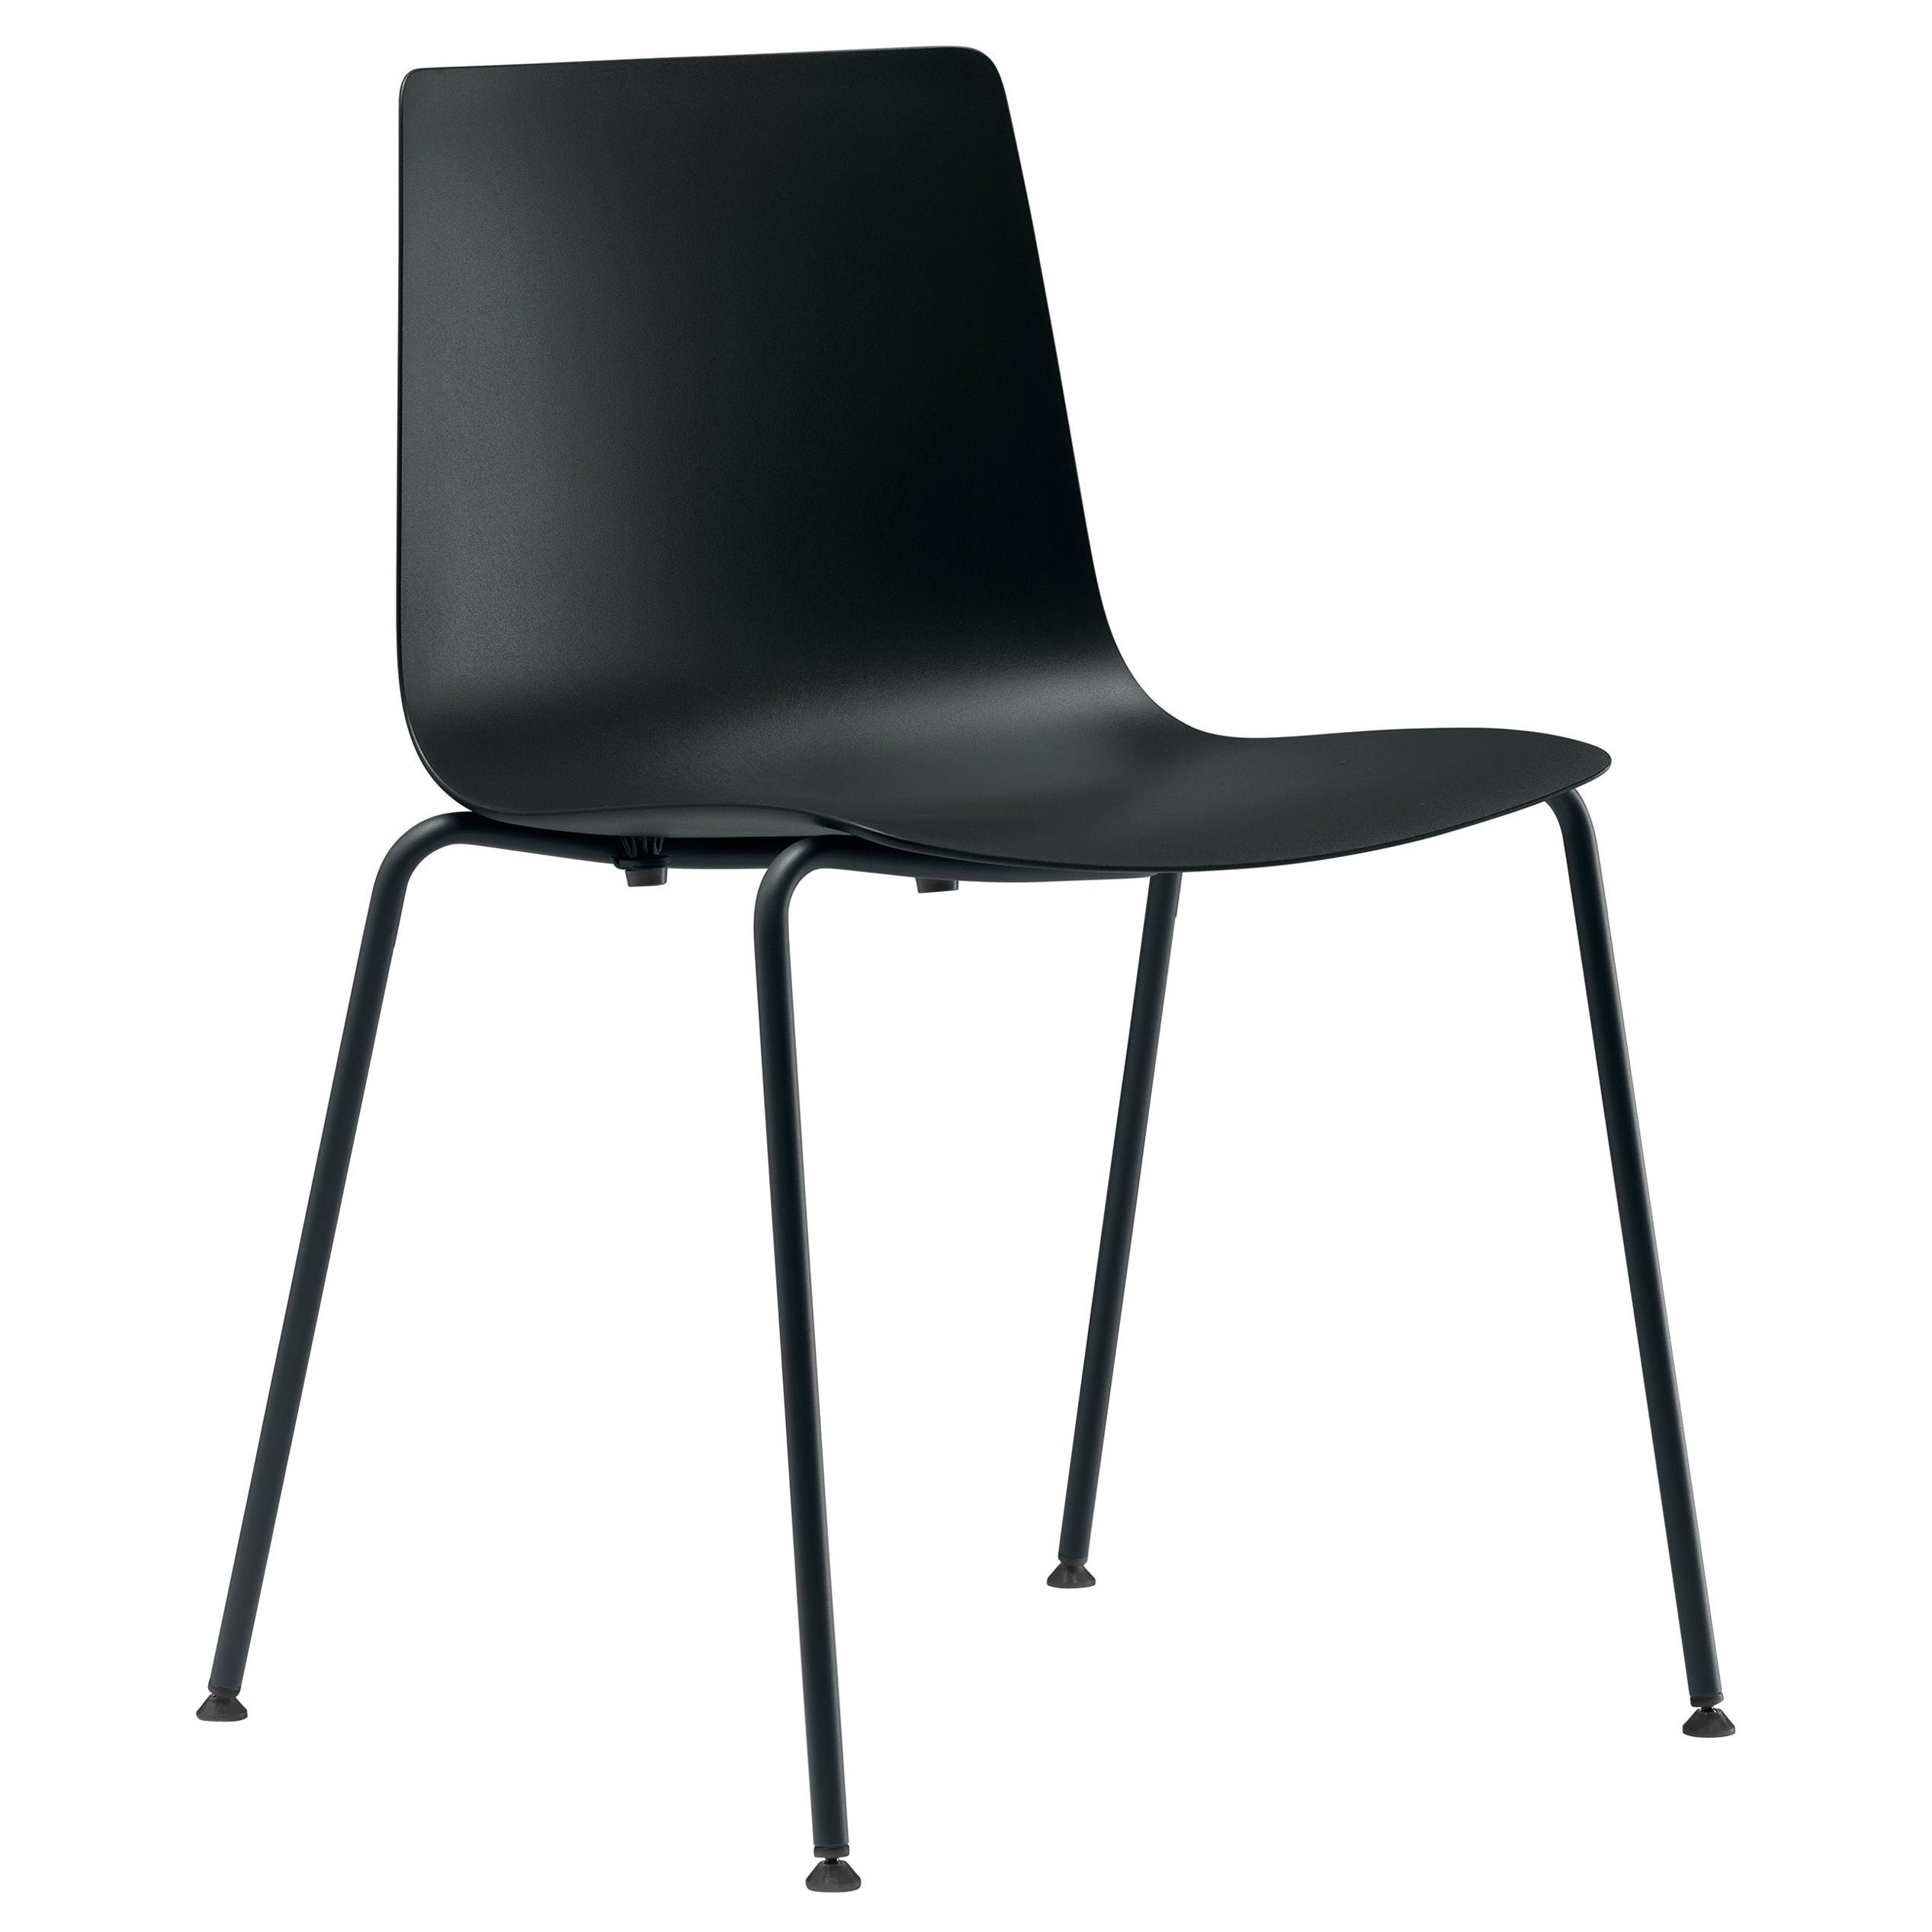 Alias 89C Slim Outdoor Chair 4 in Black Seat with Black Lacquered Steel Frame For Sale